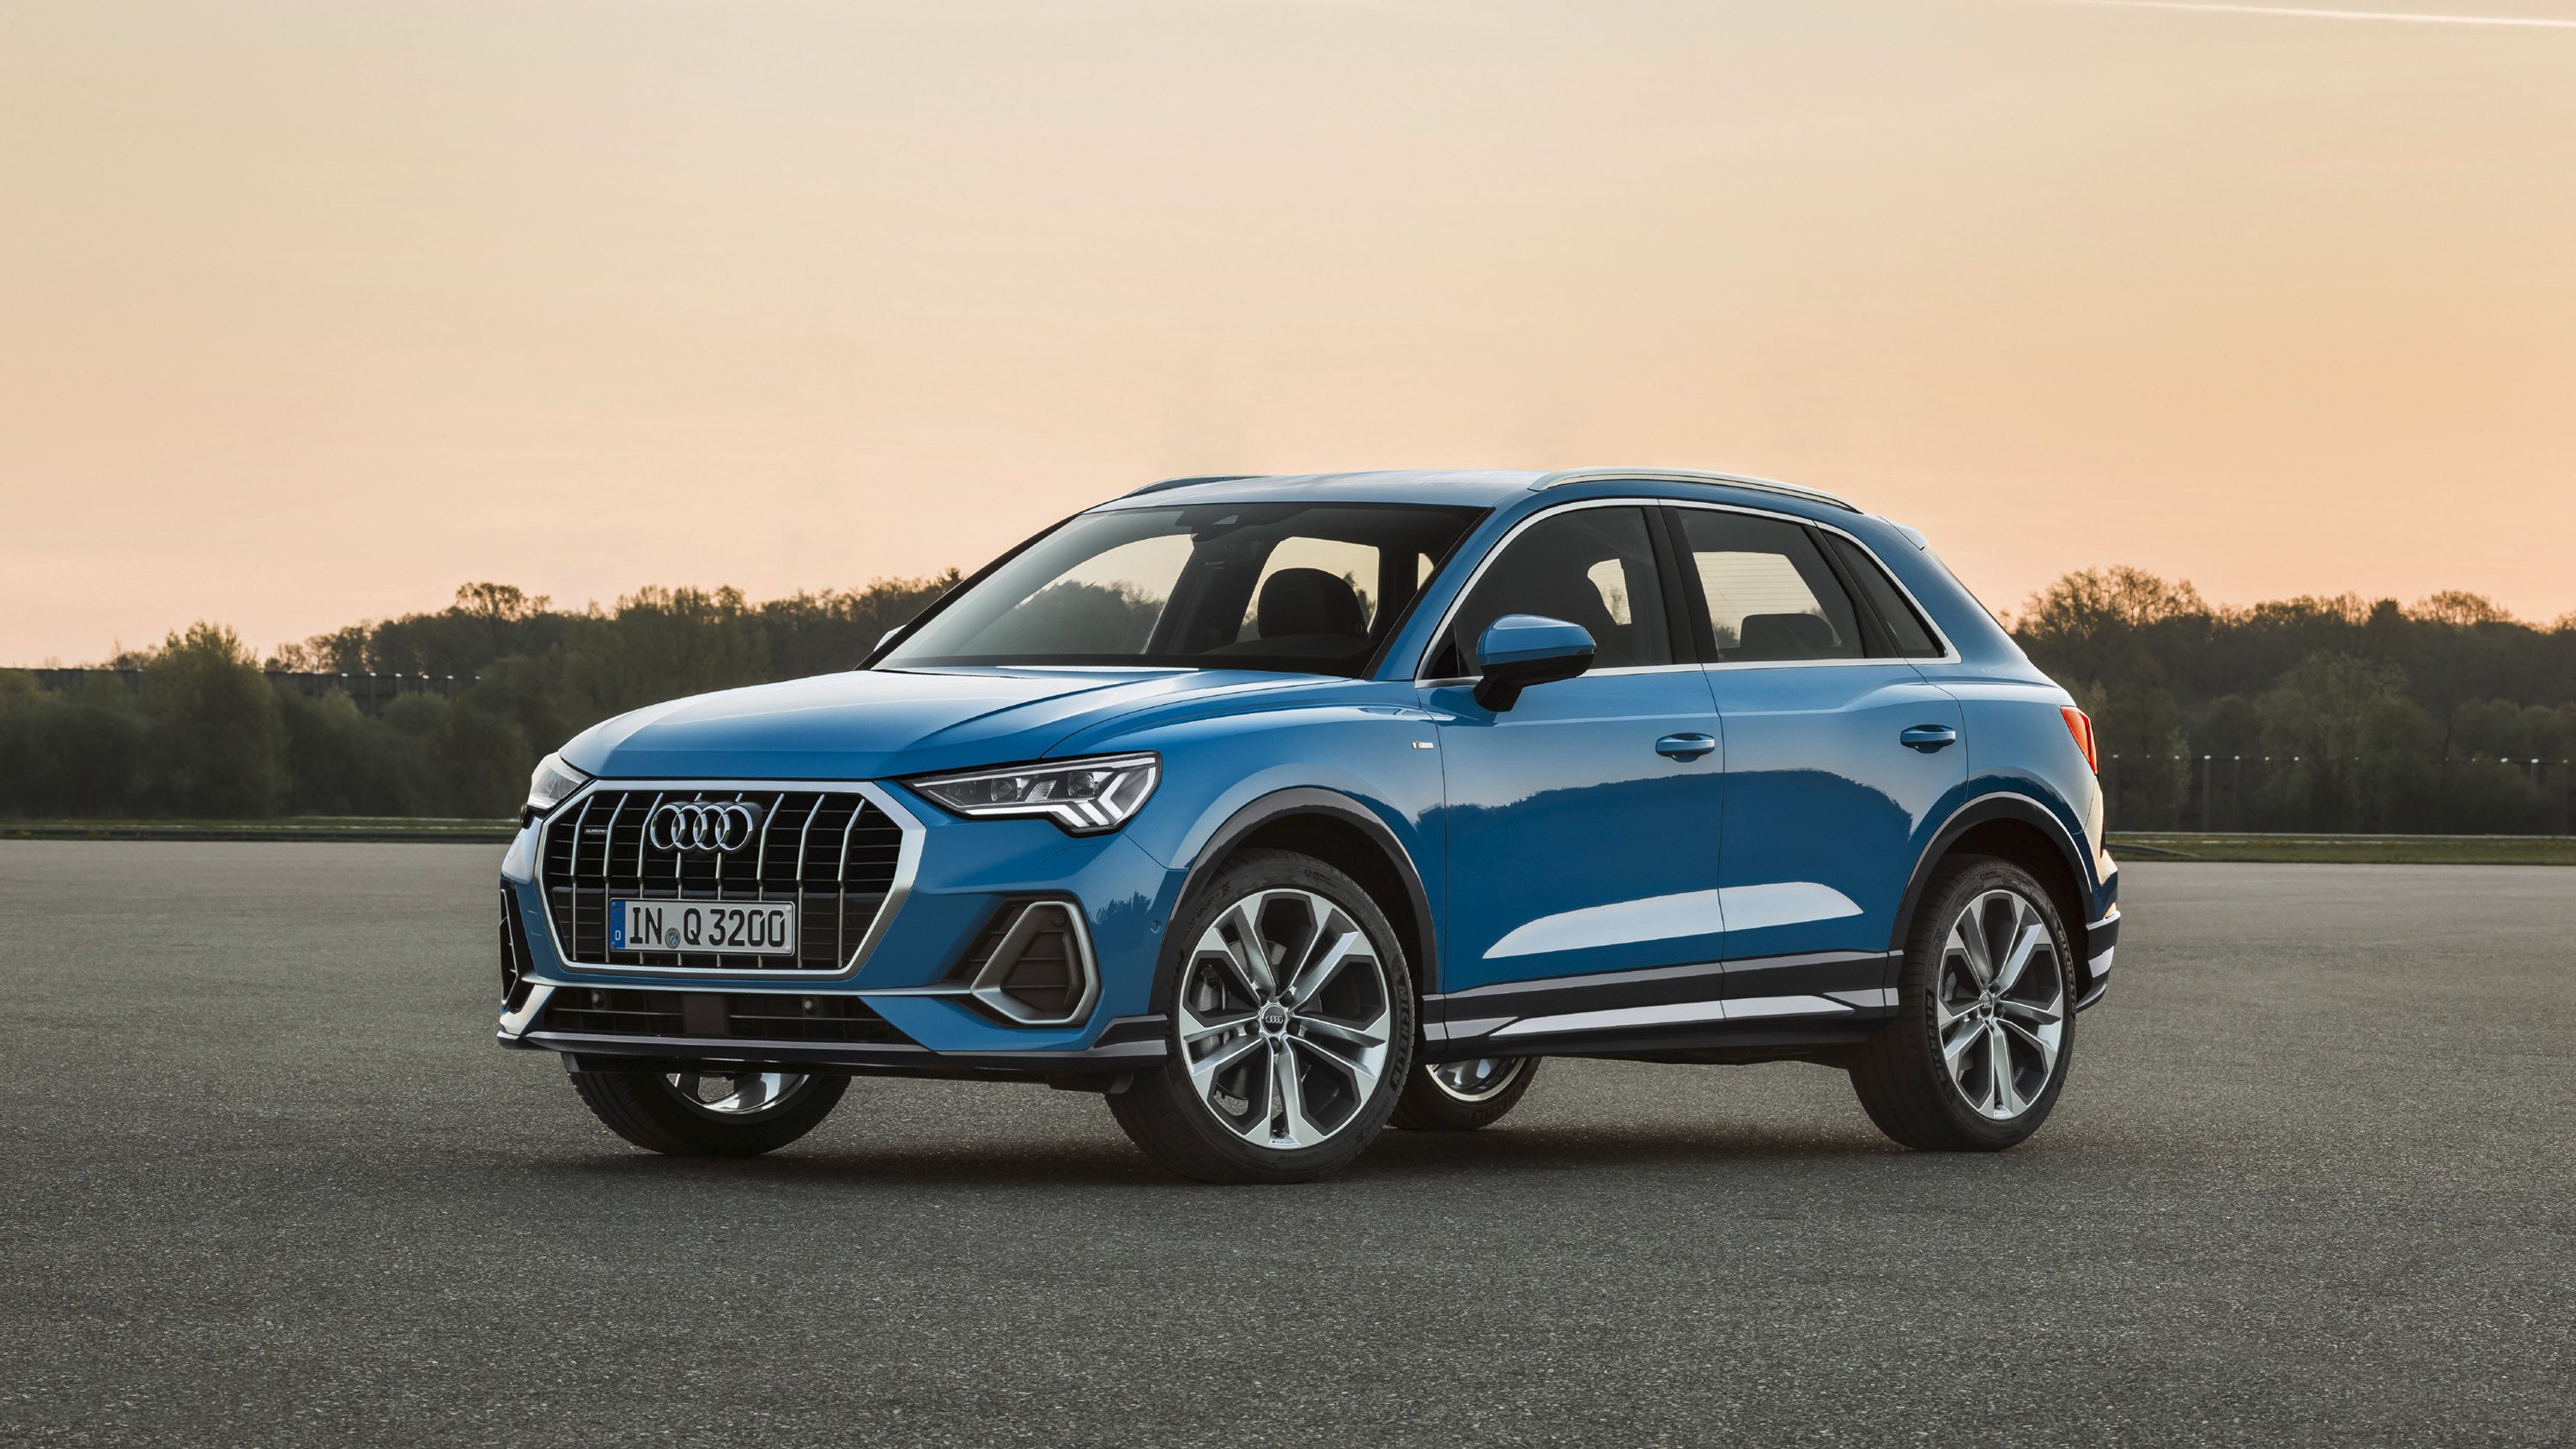 2019 Audi Q3 Pictures, Photos, Wallpapers - New Audi Q3 2019 , HD Wallpaper & Backgrounds